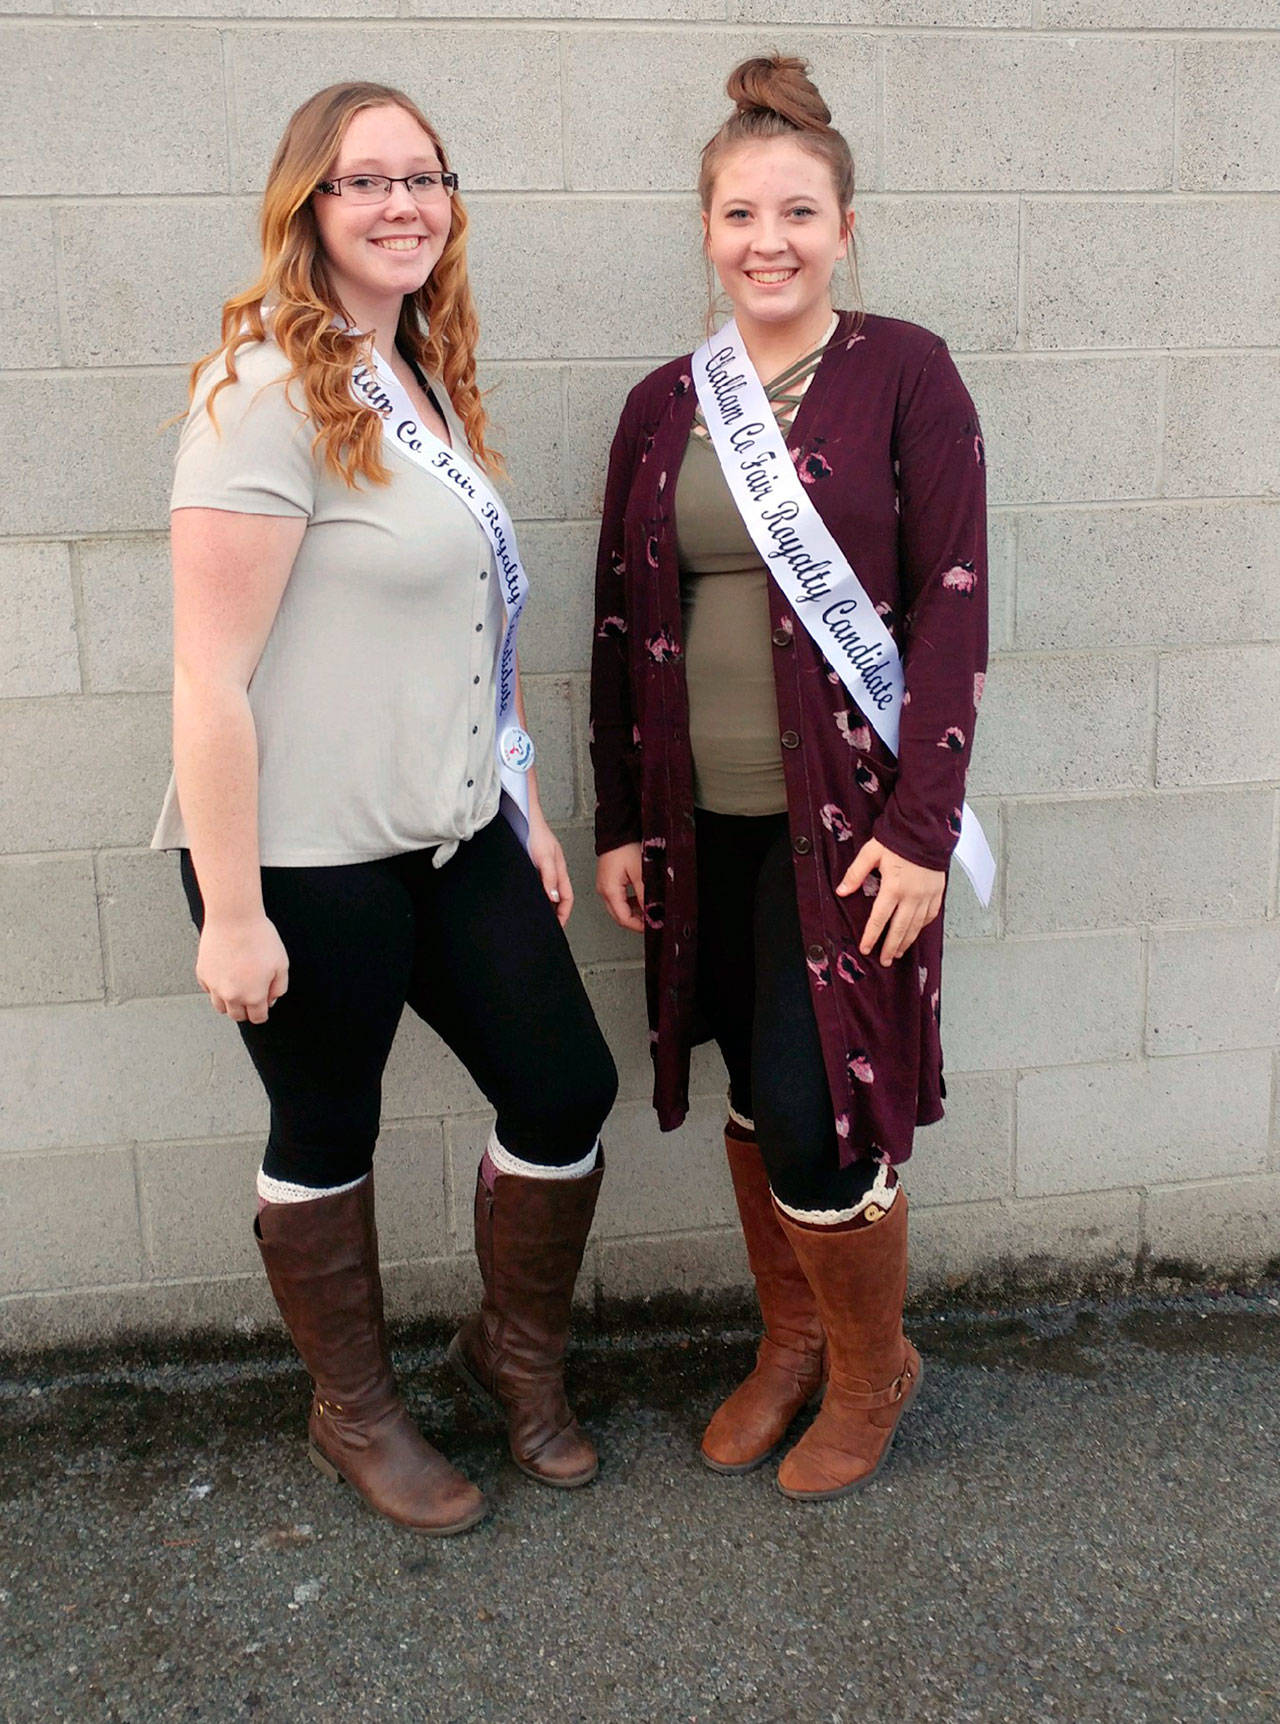 Hannah McDaniel, left, and Anna Menkal are candidates for 2020 Clallam County Fair Royalty. Submitted photo